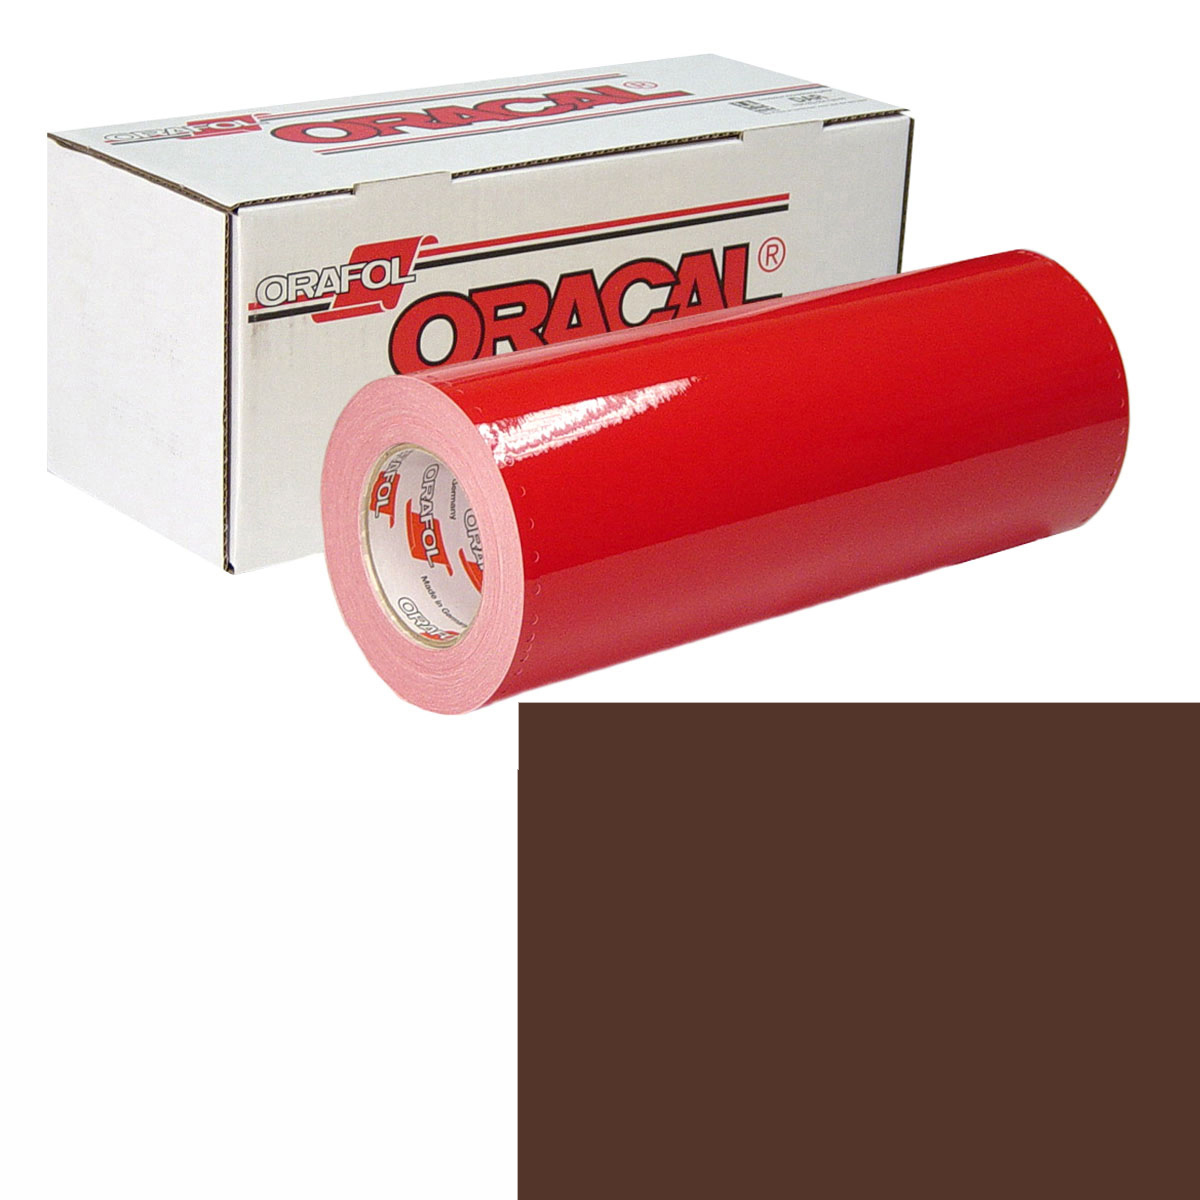 ORACAL 951 Unp 24in X 50yd 810 Cocoa Brown